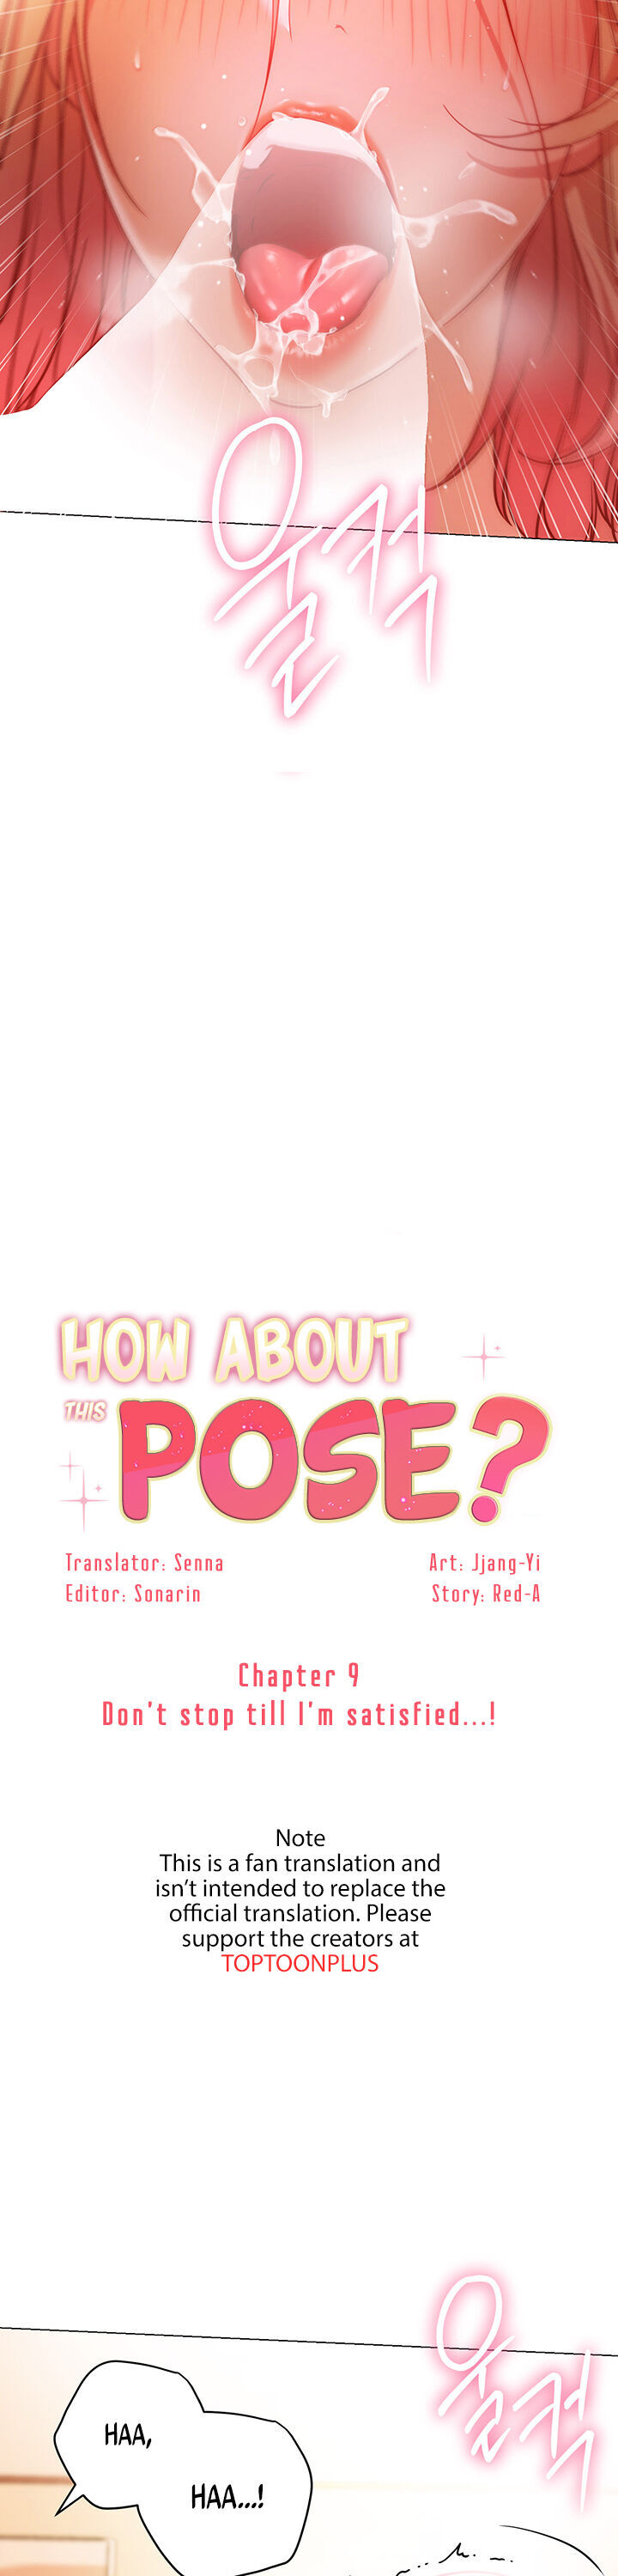 How About This Pose? - Chapter 9 Page 4